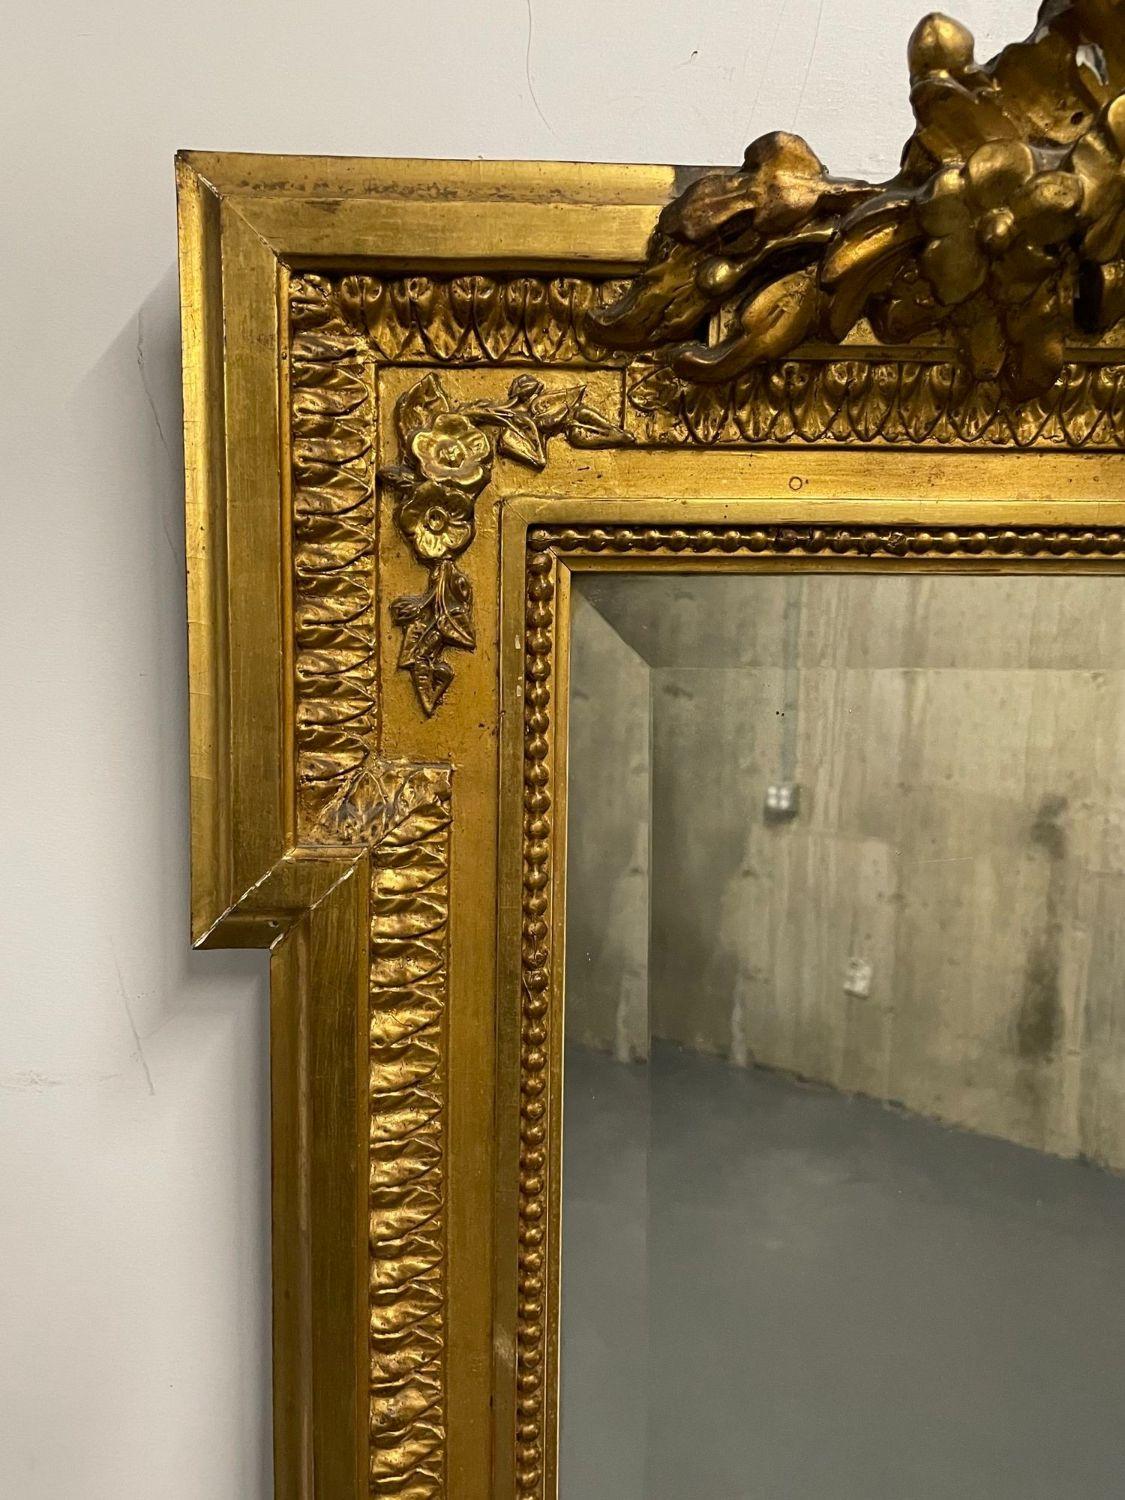 19th Century French Giltwood Wall, console, Pier mirror, Carved.

Finely carved and detailed beveled mirror. Mid to Late 19th Century with a bullet carved rectangular frame leading to an ornate pediment that is shell carved flanked by roses and